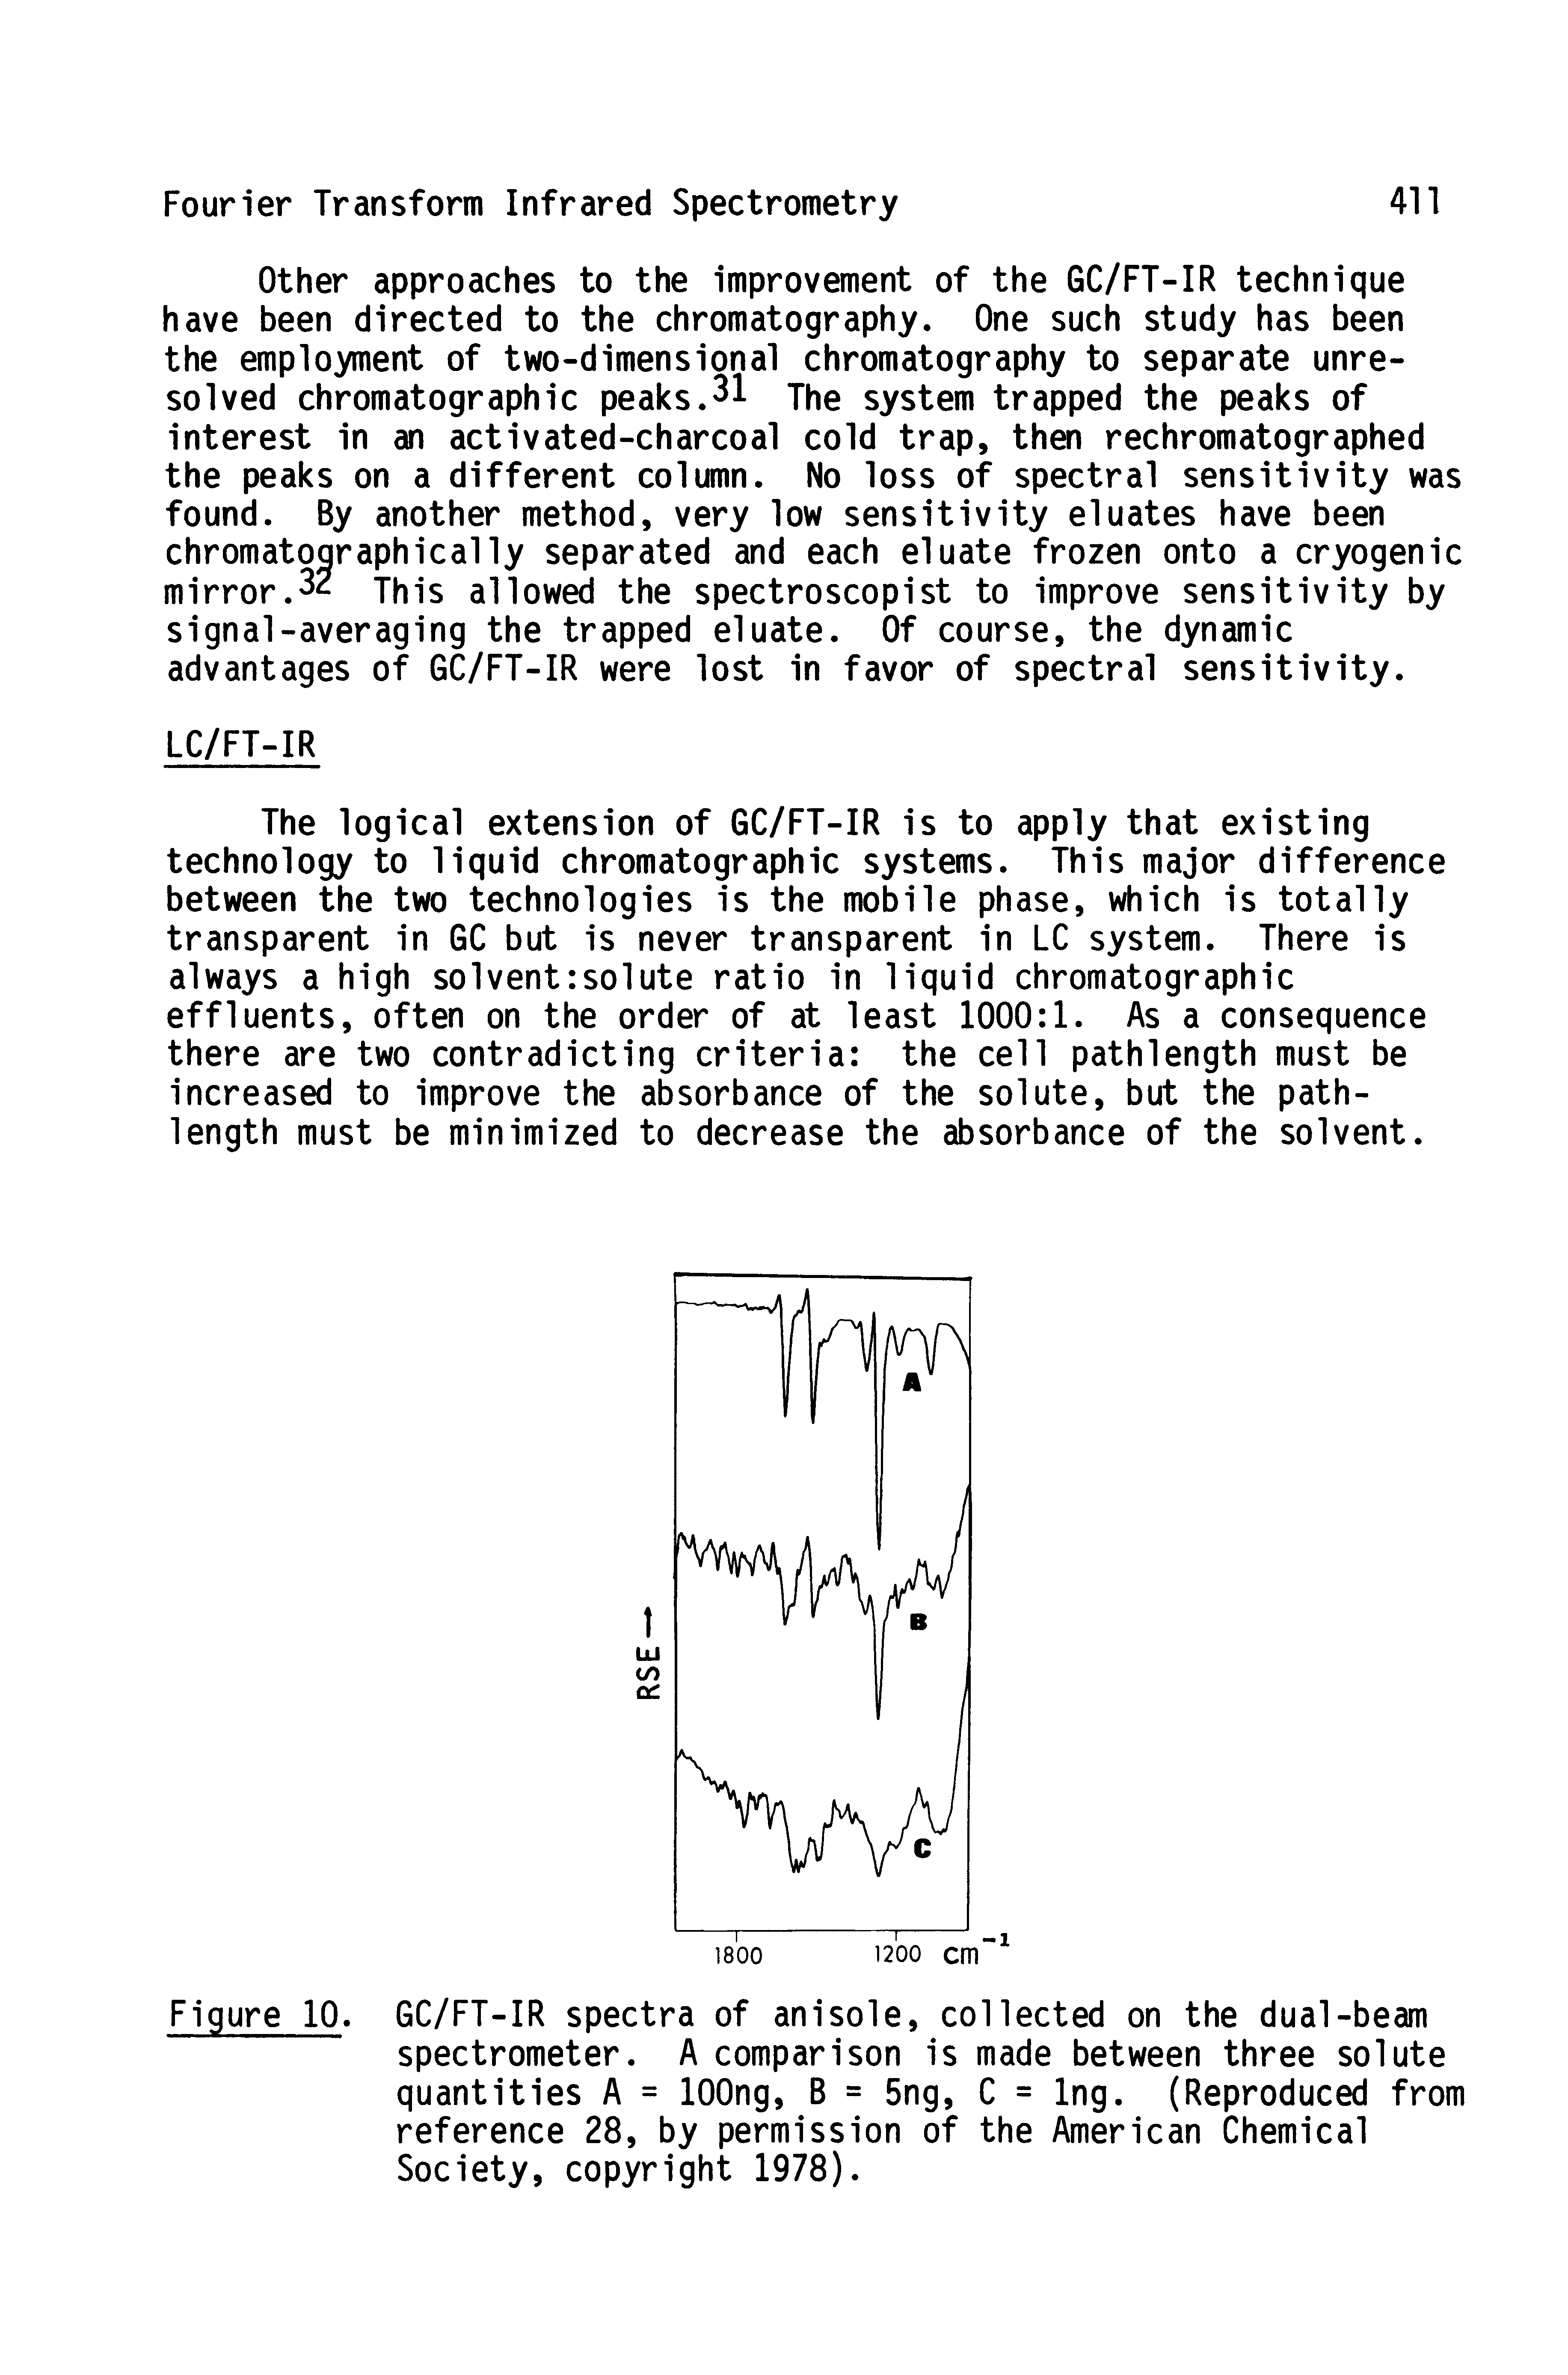 Figure 10. GC/FT-IR spectra of anisole, collected on the dual-beam spectrometer. A comparison is made between three solute quantities A = lOOng, B = 5ng, C = Ing. (Reproduced from reference 28, by permission of the American Chemical Society, copyright 1978).